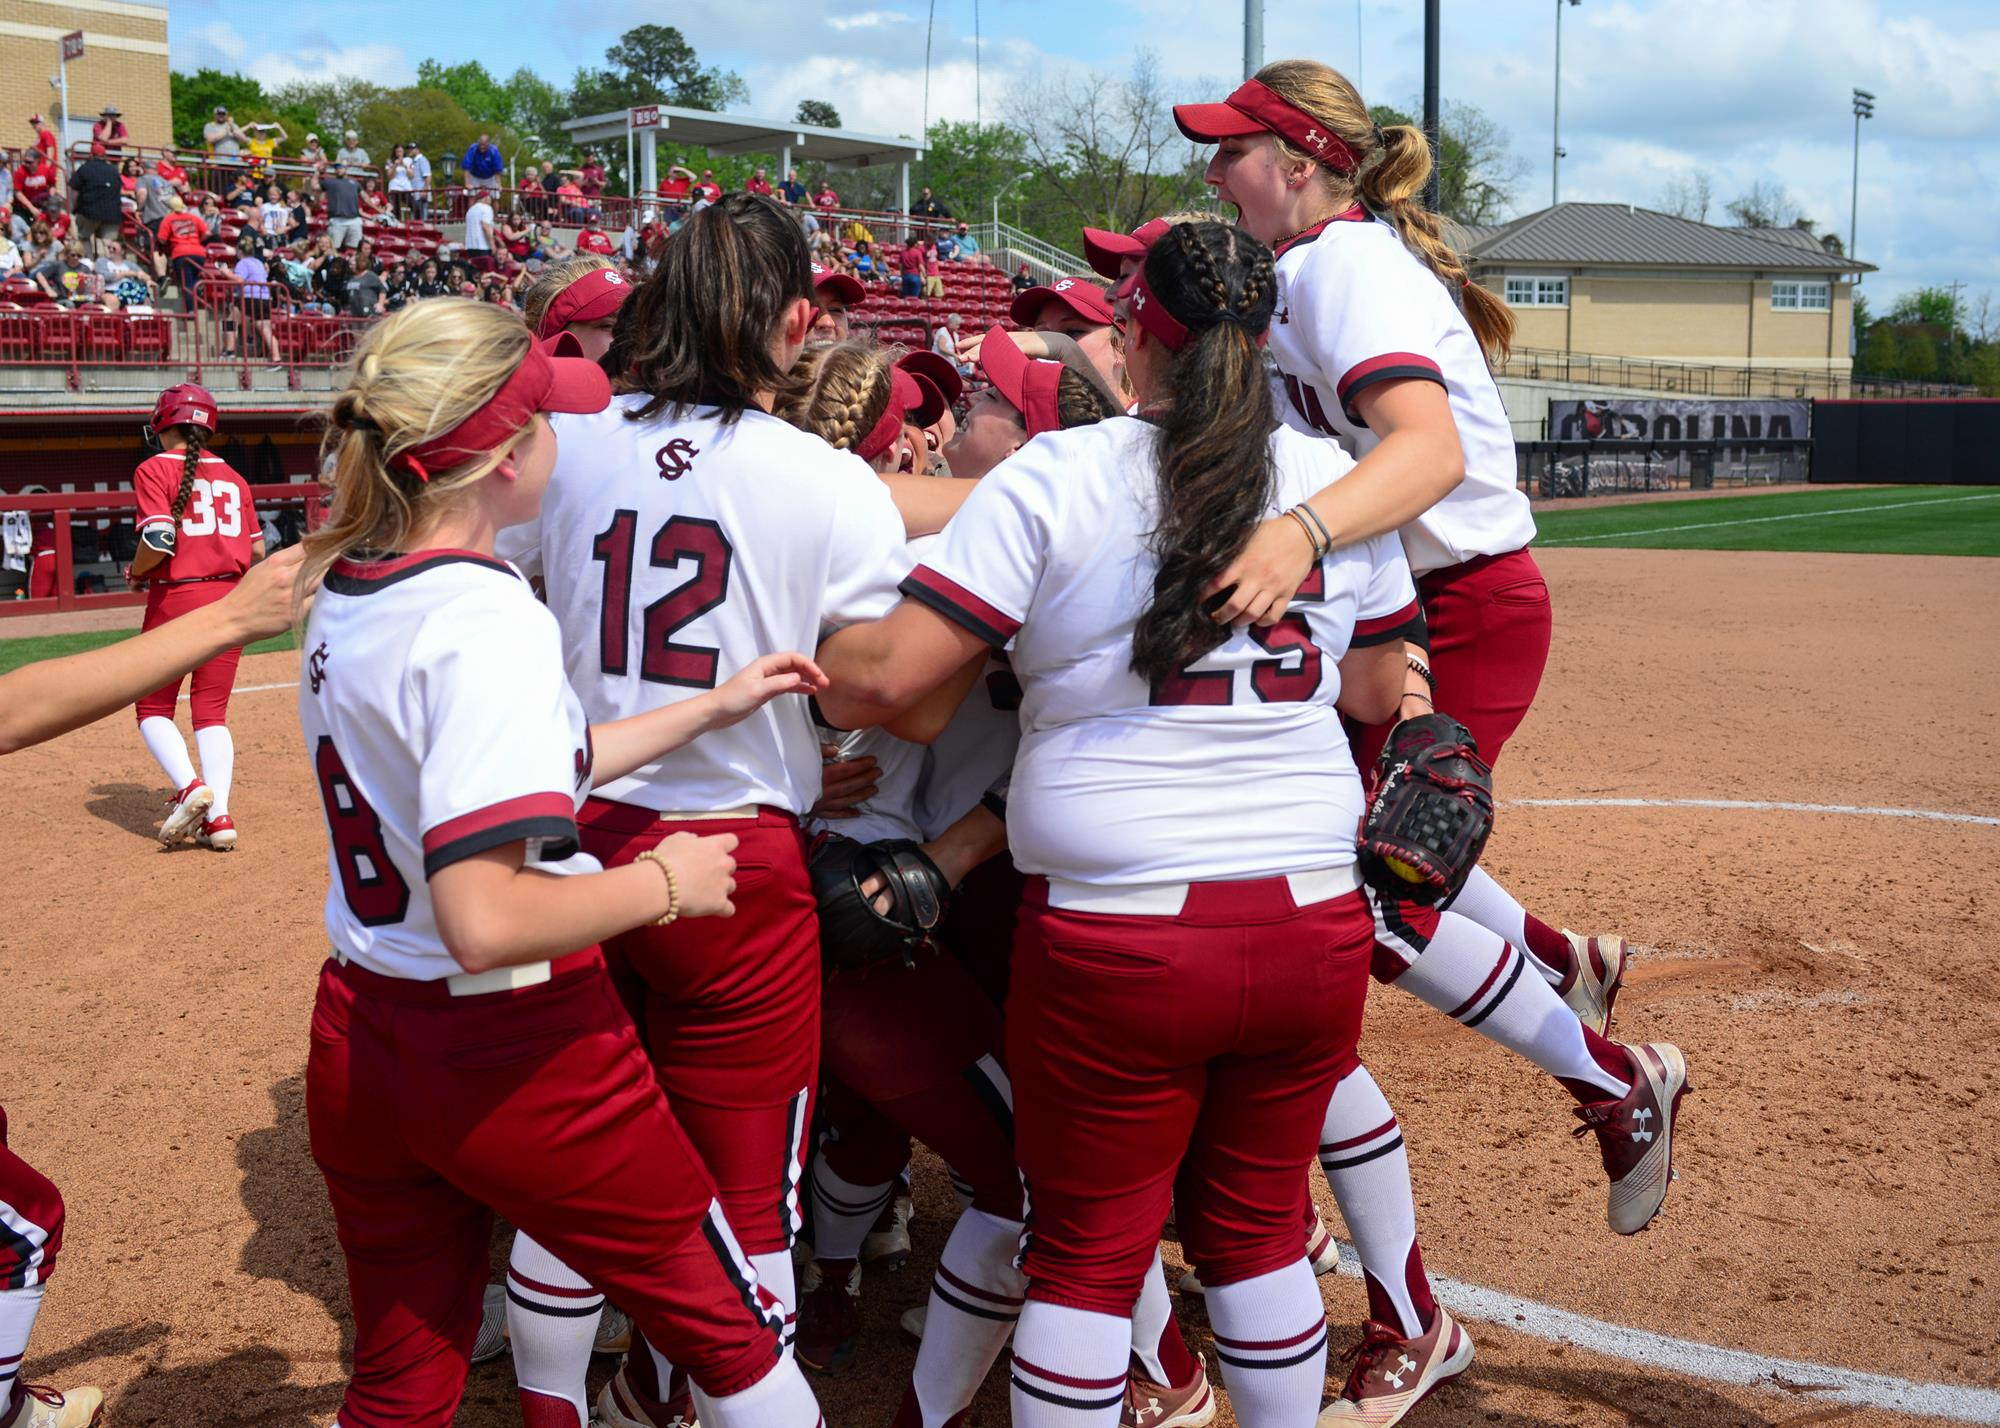 Softball Schedule For Clearwater Tournament Announced